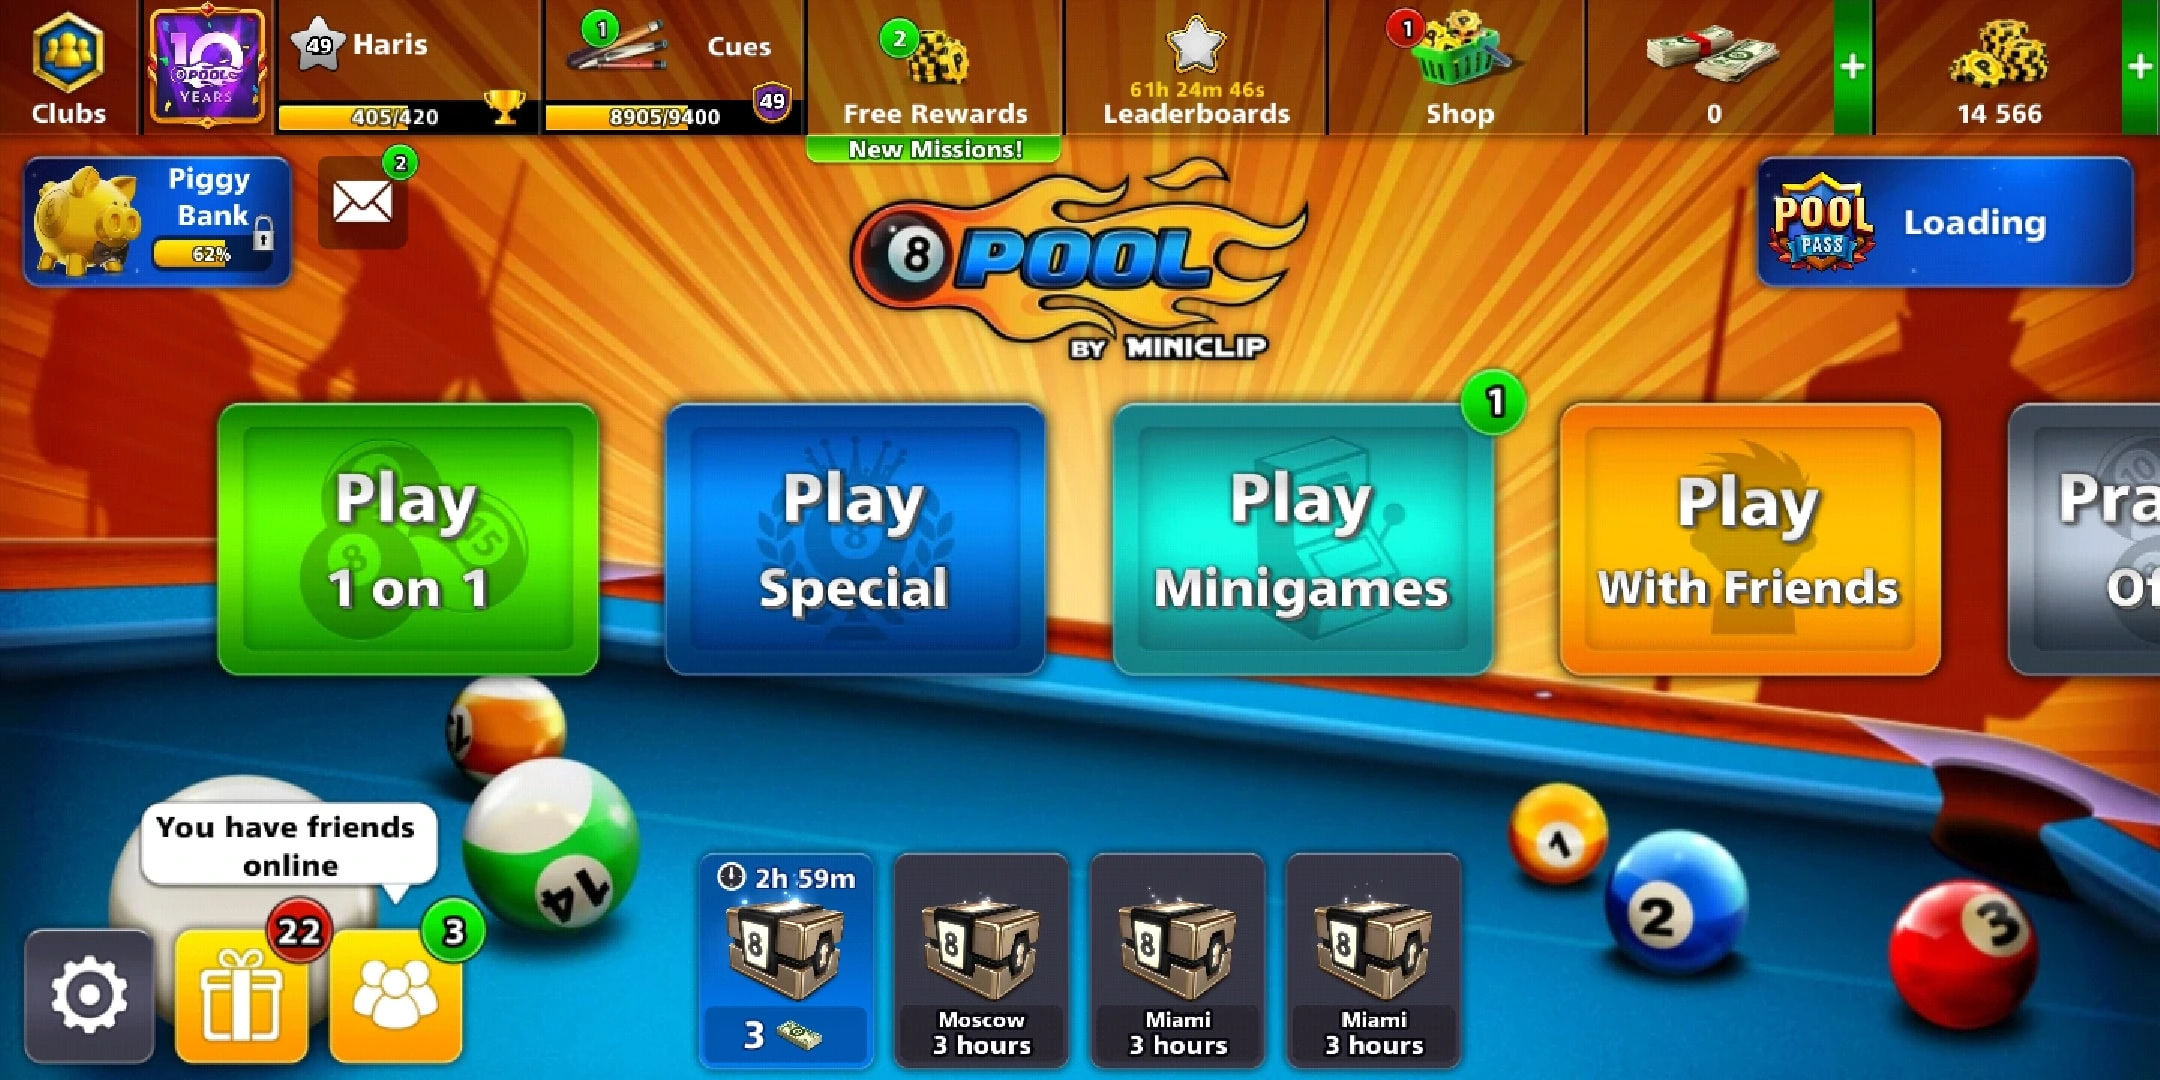 8 Ball Pool APK 5.14.7 Download - Latest Version for Android